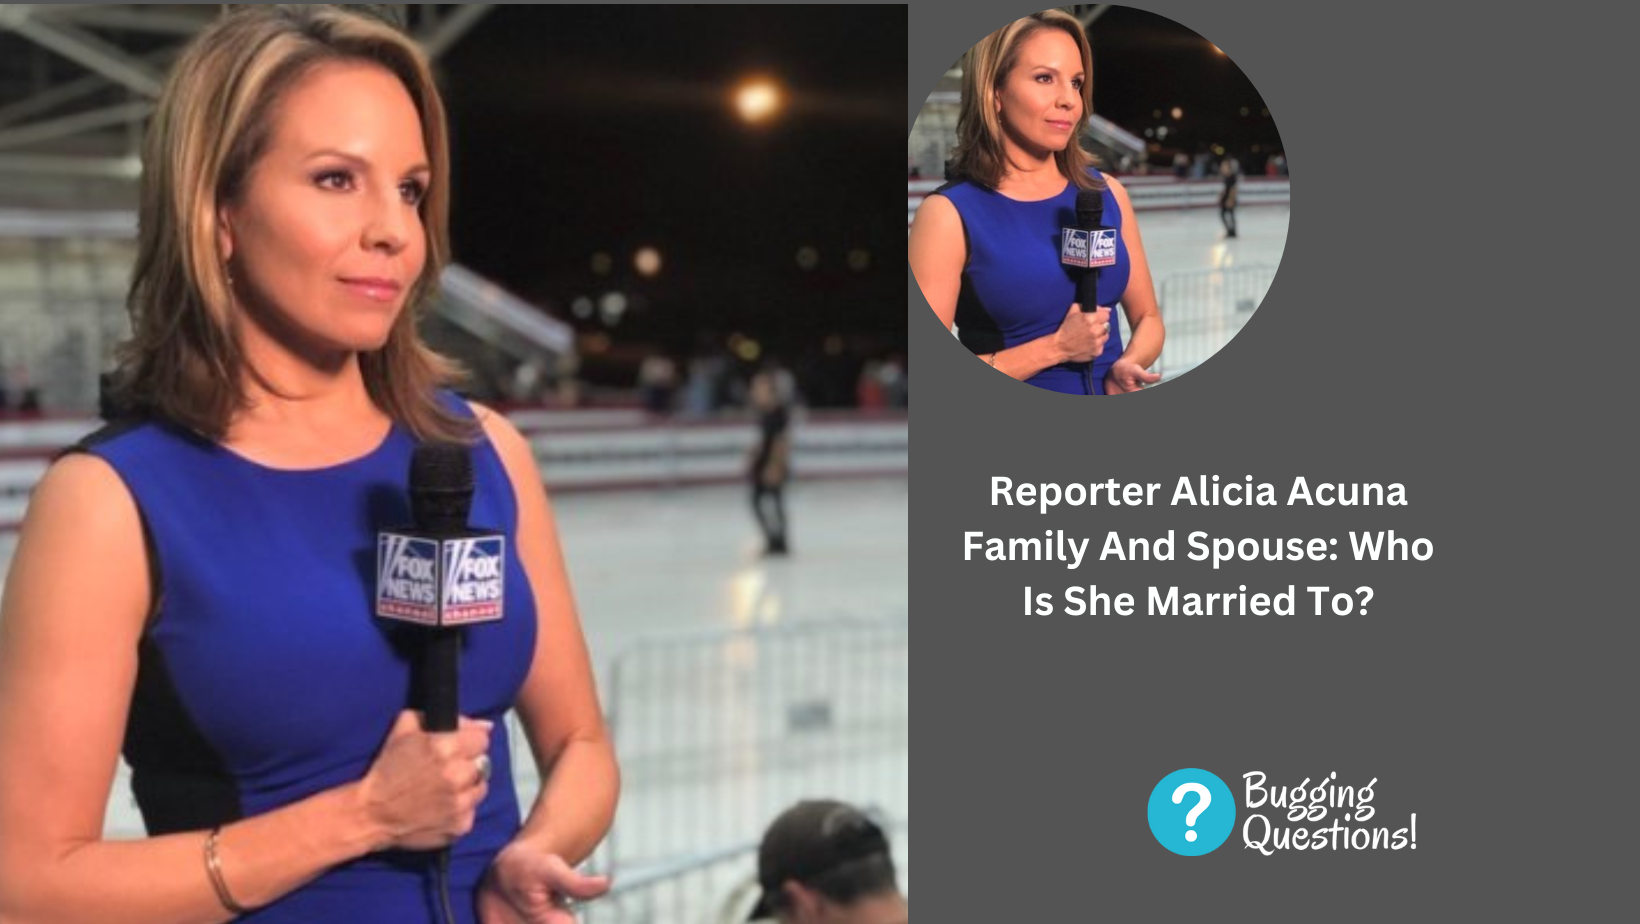 Reporter Alicia Acuna Family And Spouse: Who Is She Married To?